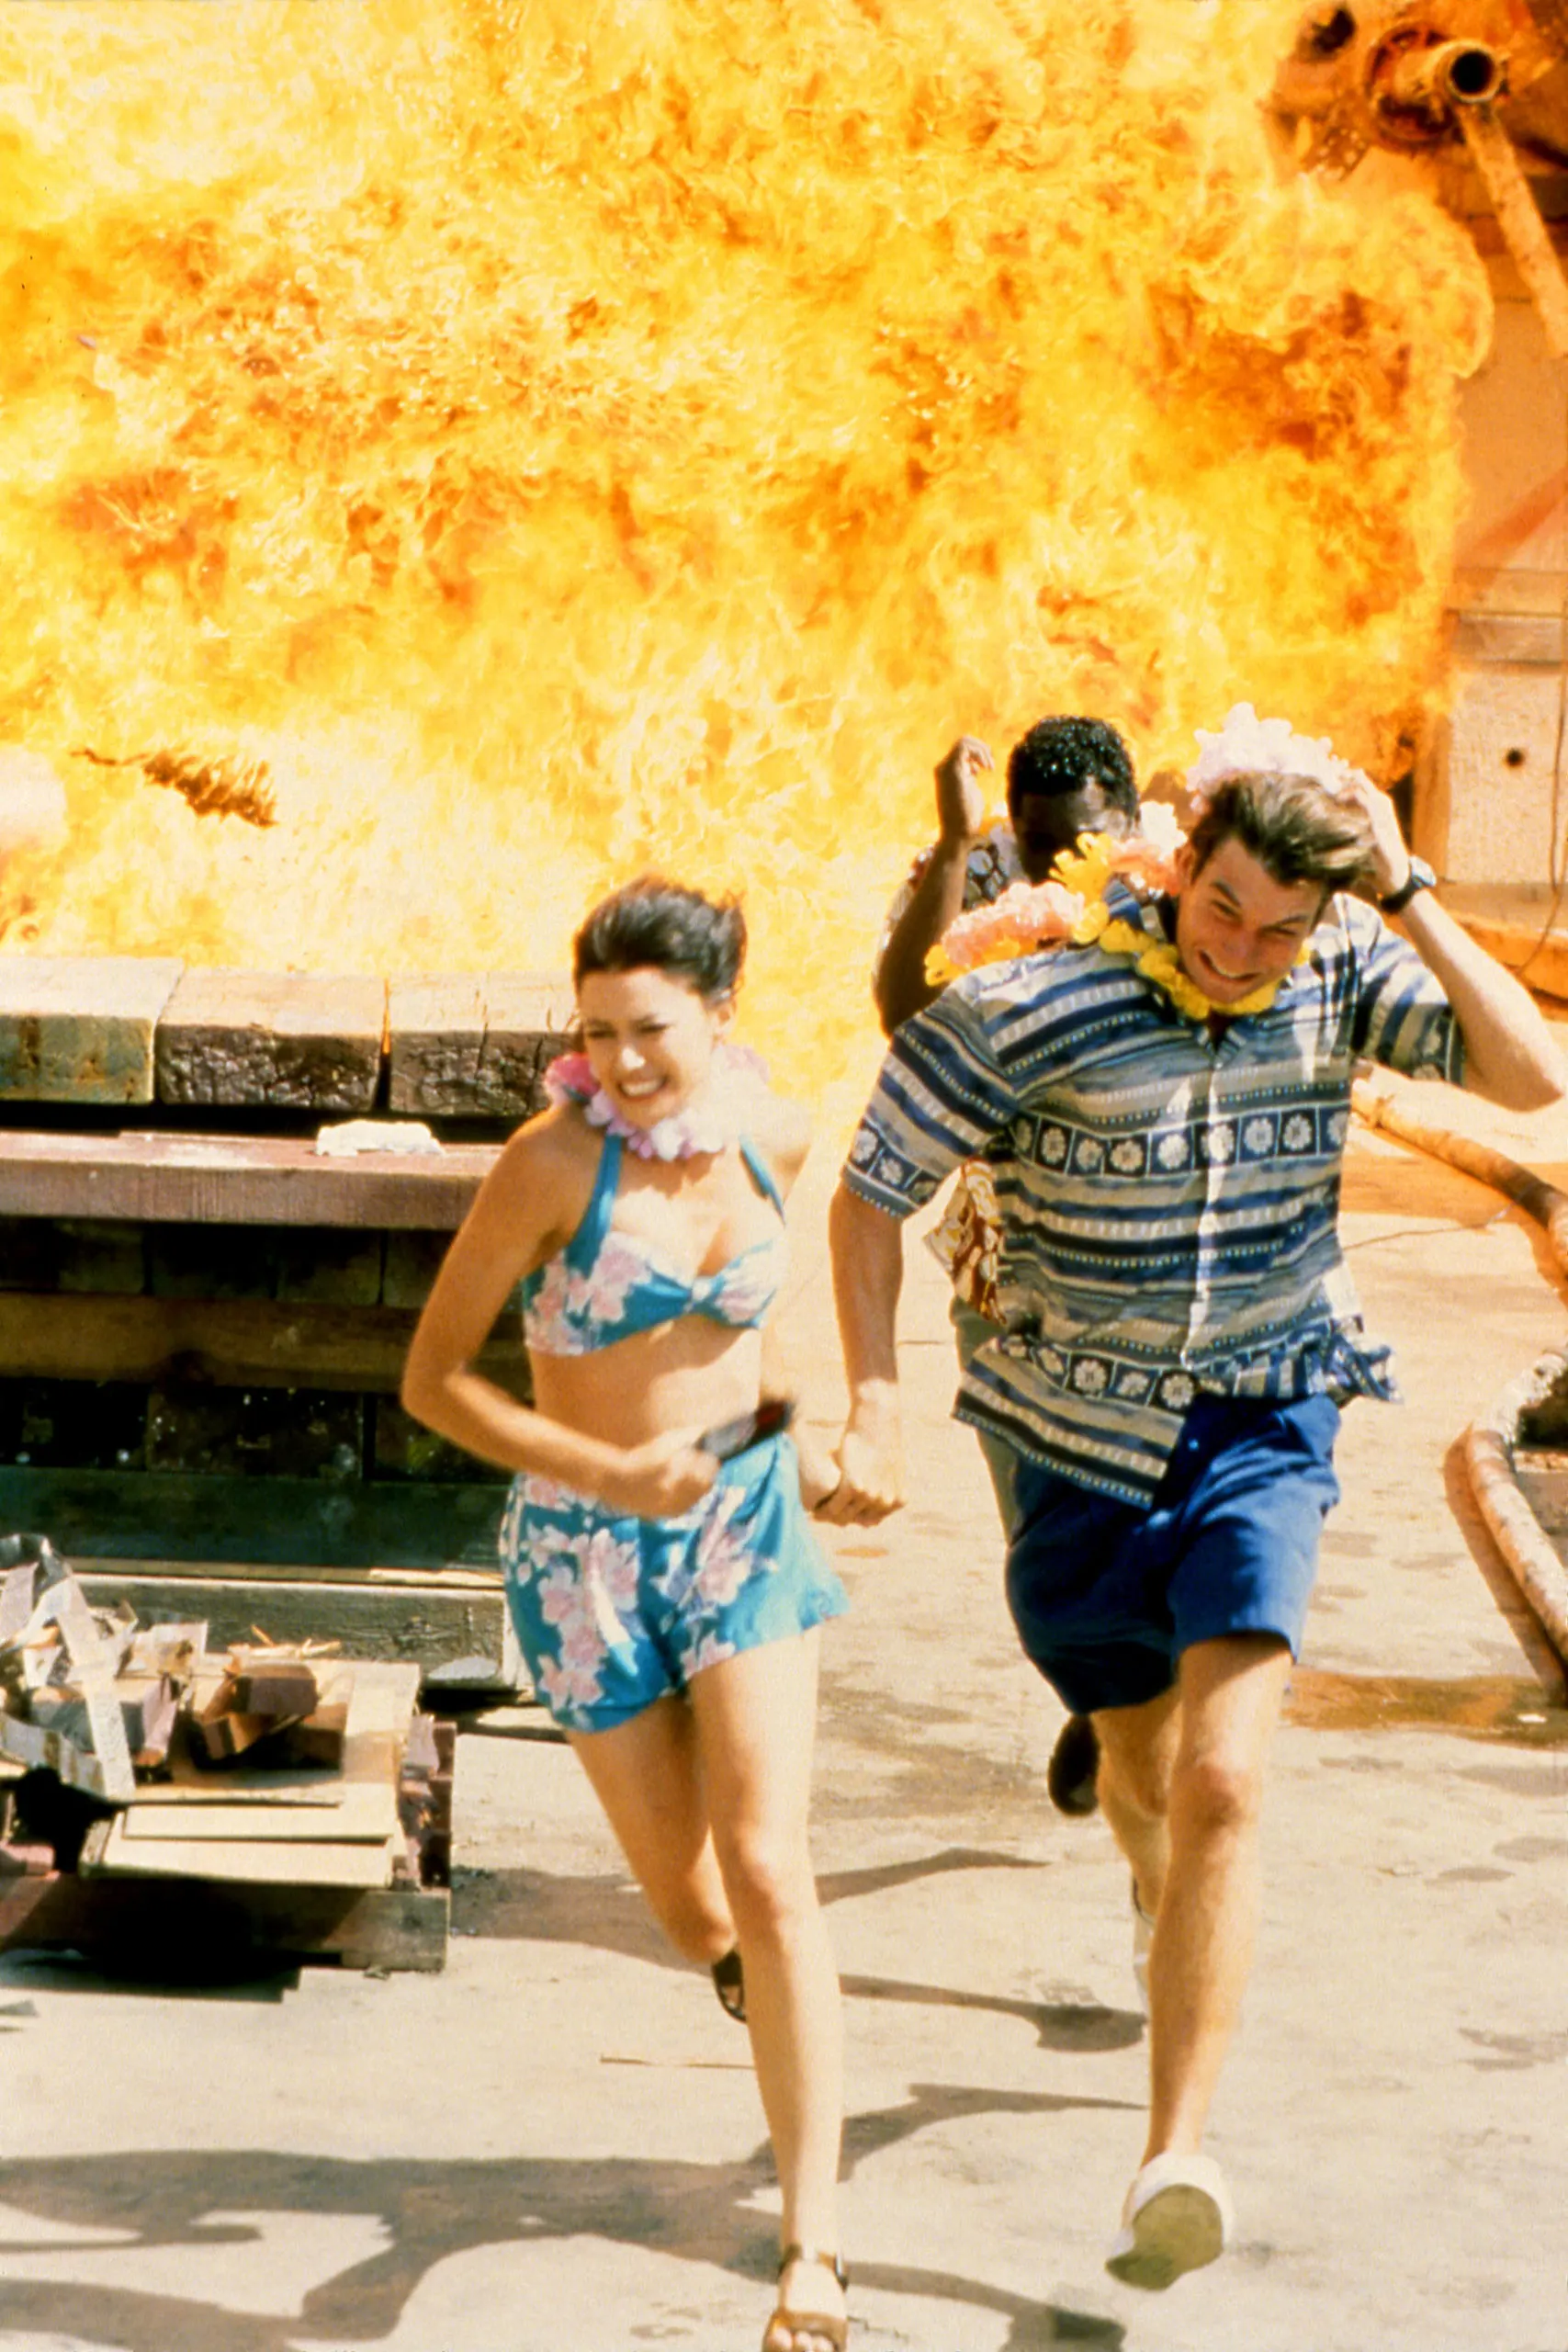 Behind the scene photo of the Sliders trio running from an explosion in the episode Common Ground